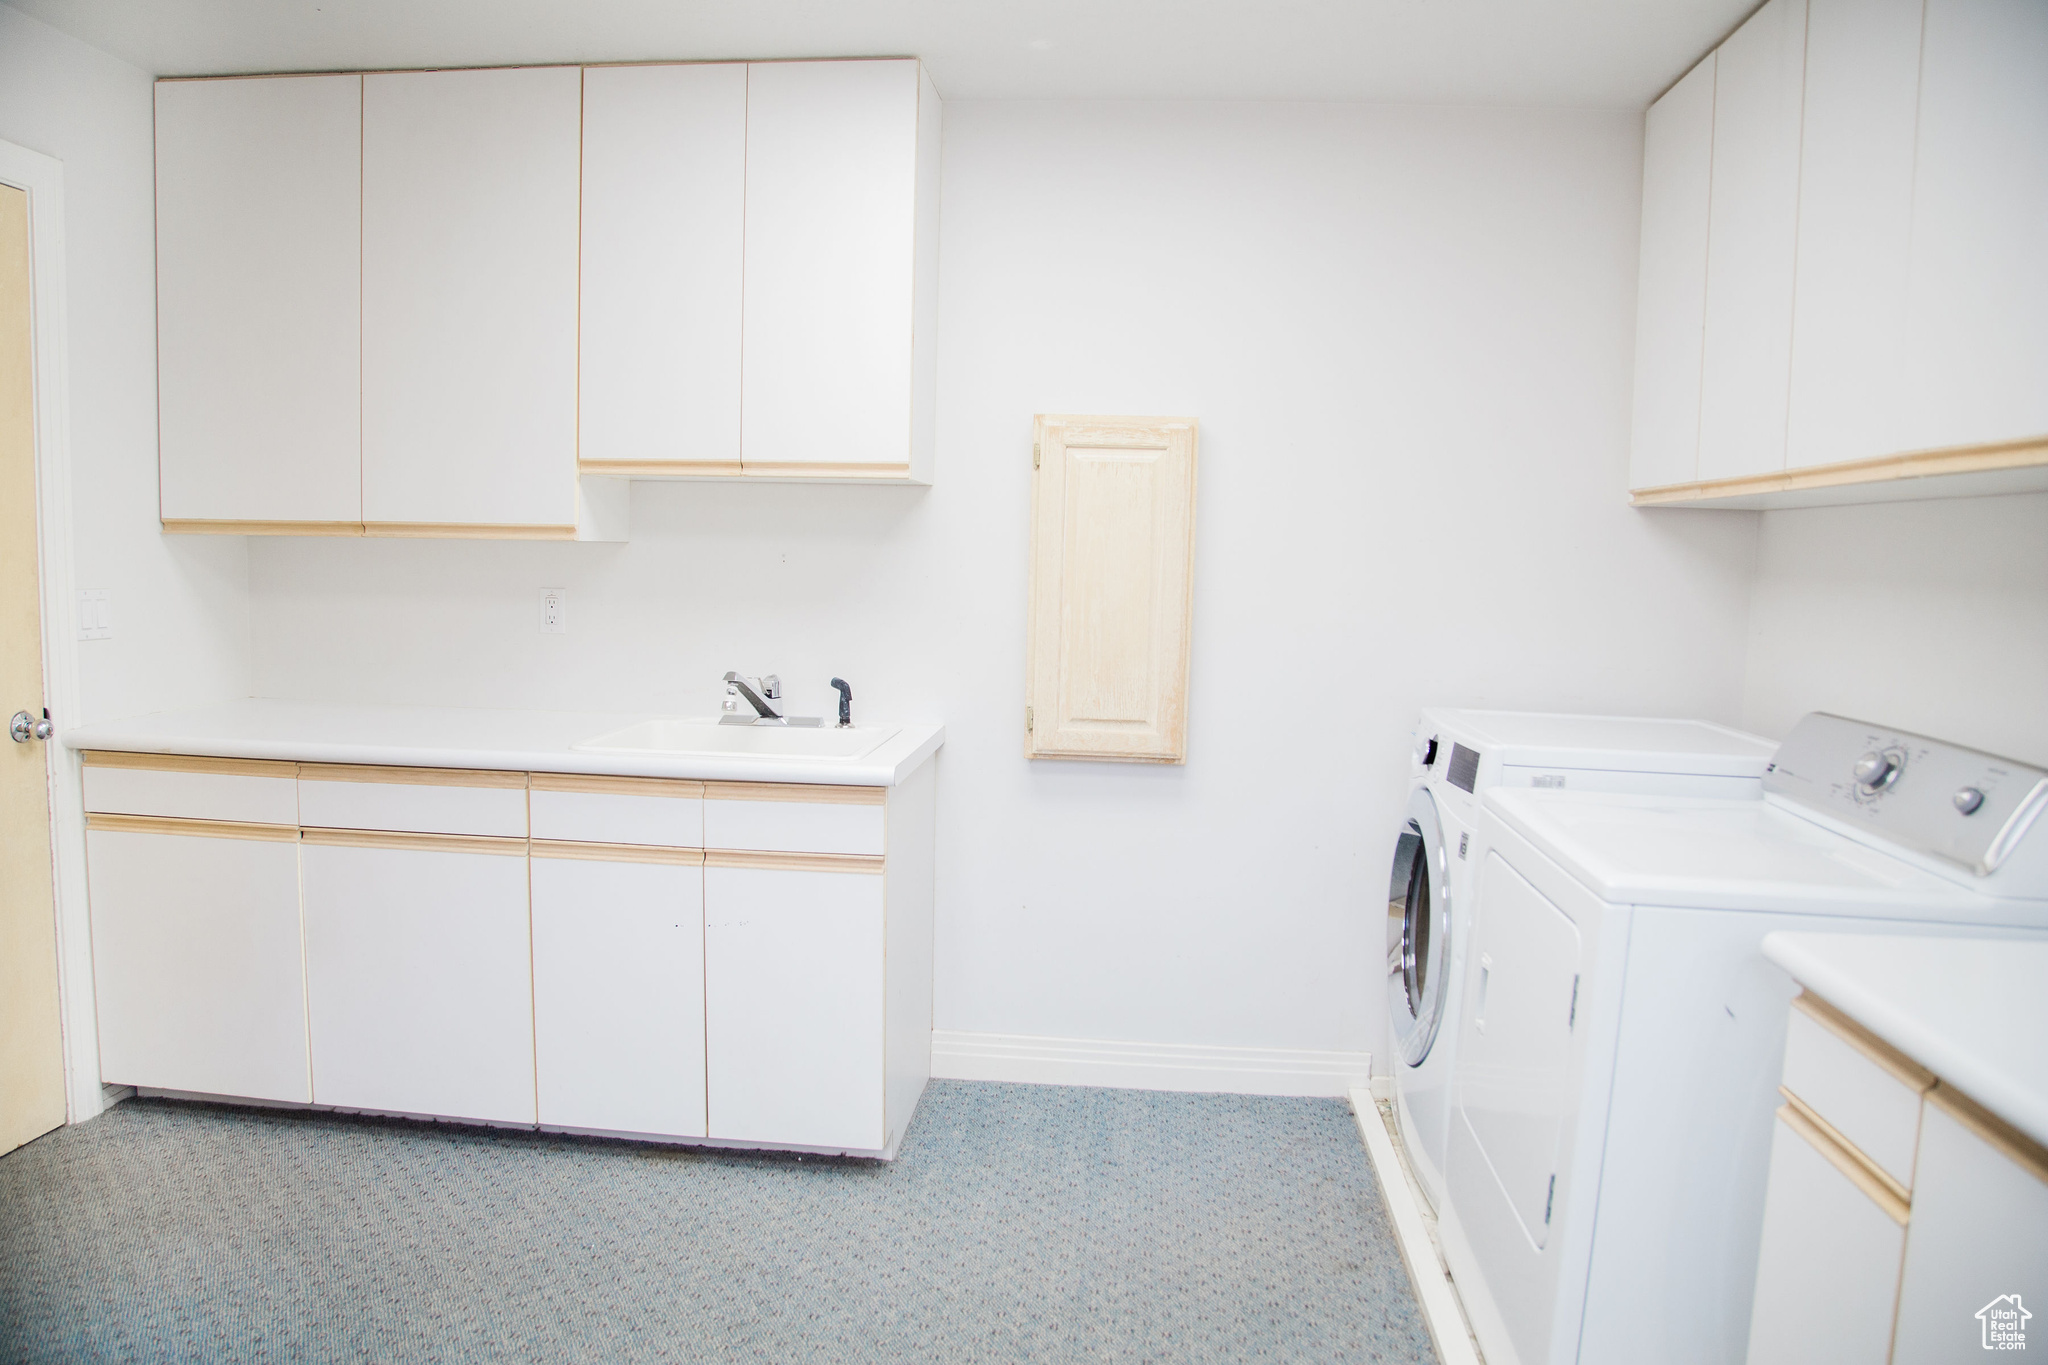 Laundry room with lots of cabinets and space